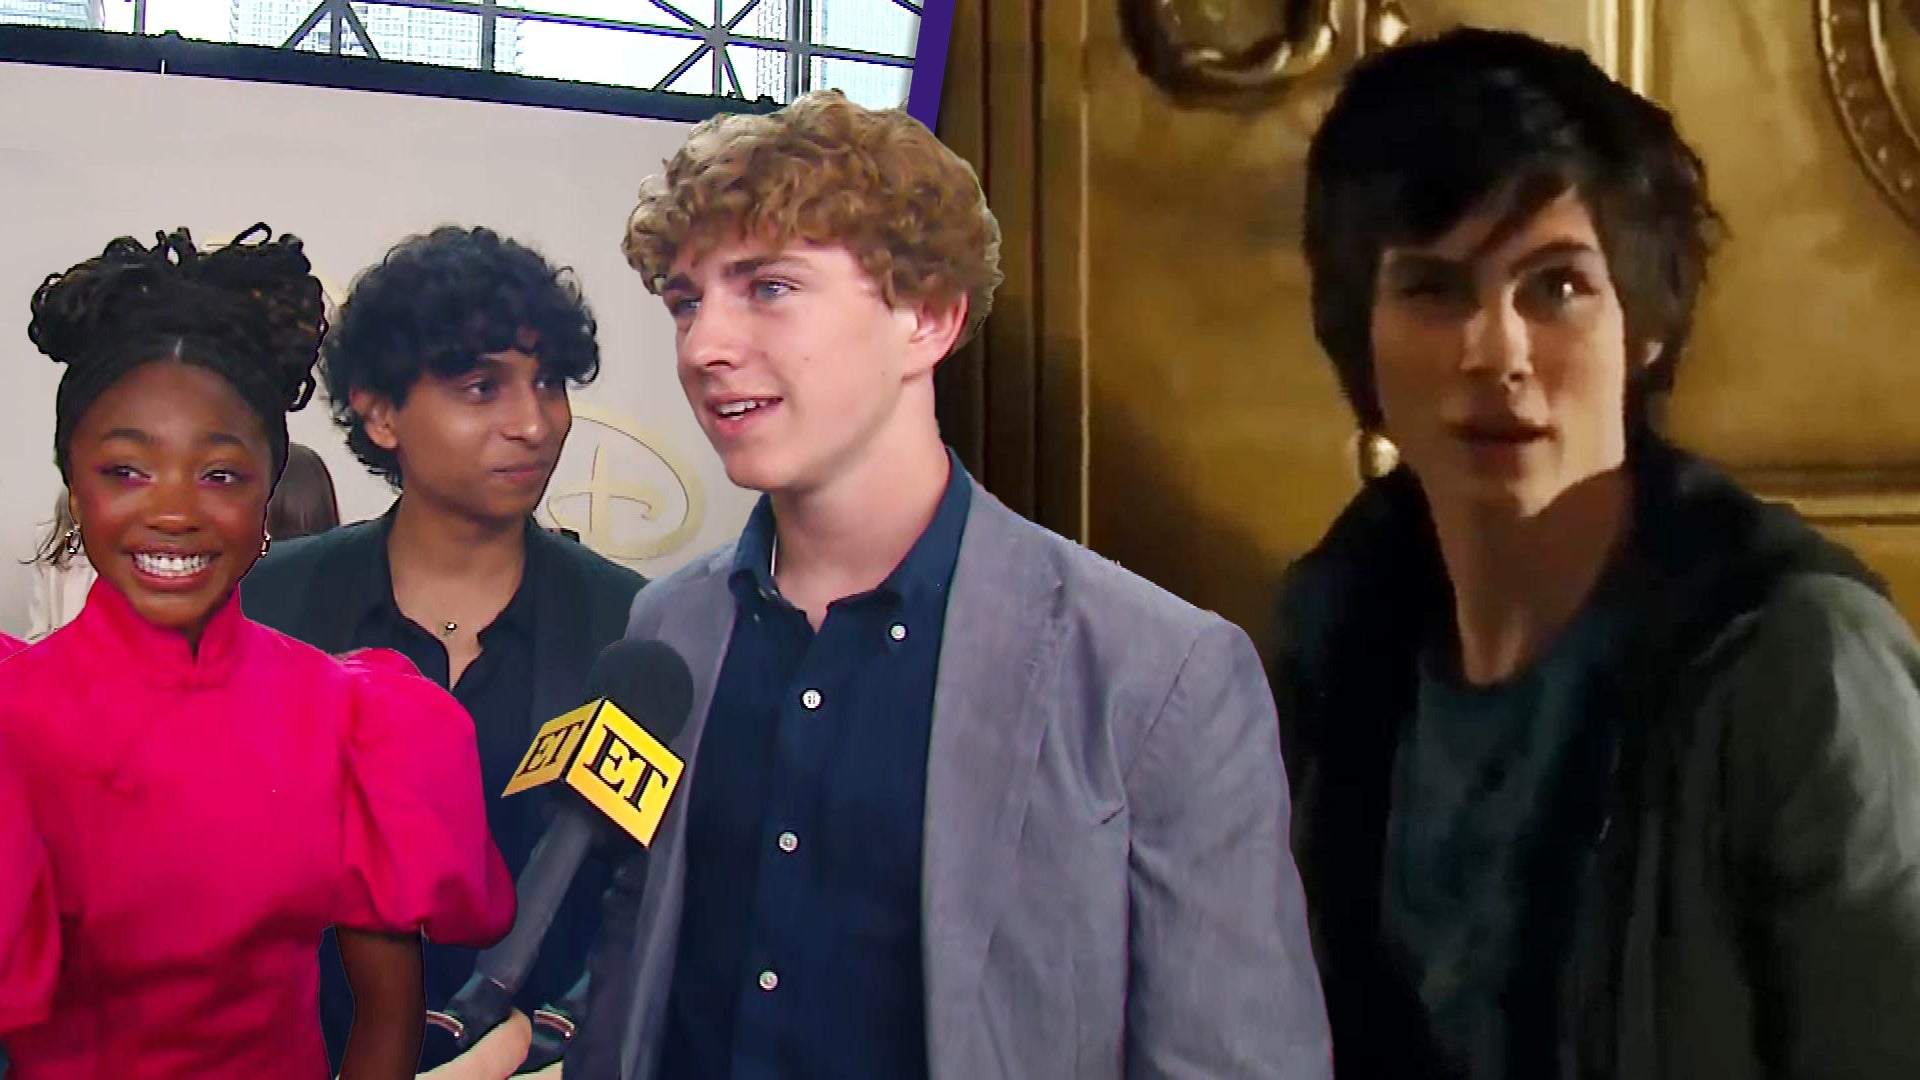 'Percy Jackson' Cast Weighs In on 'Bigger, Darker' Season 2 and a Logan Lerman Cameo 